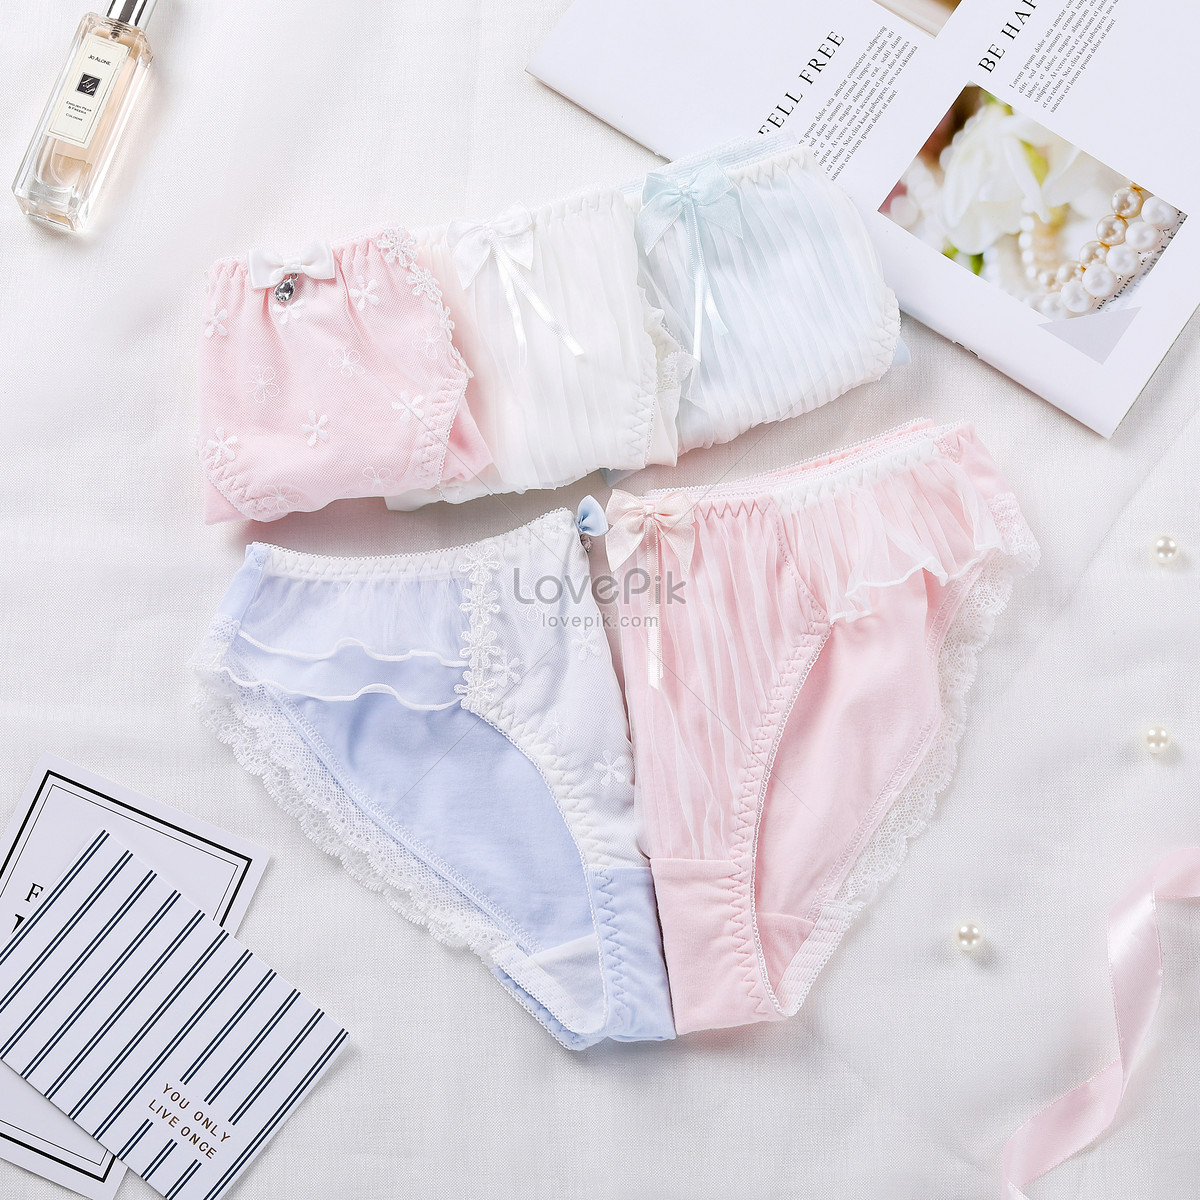 Girls Cotton Underwear Picture And HD Photos | Free Download On Lovepik